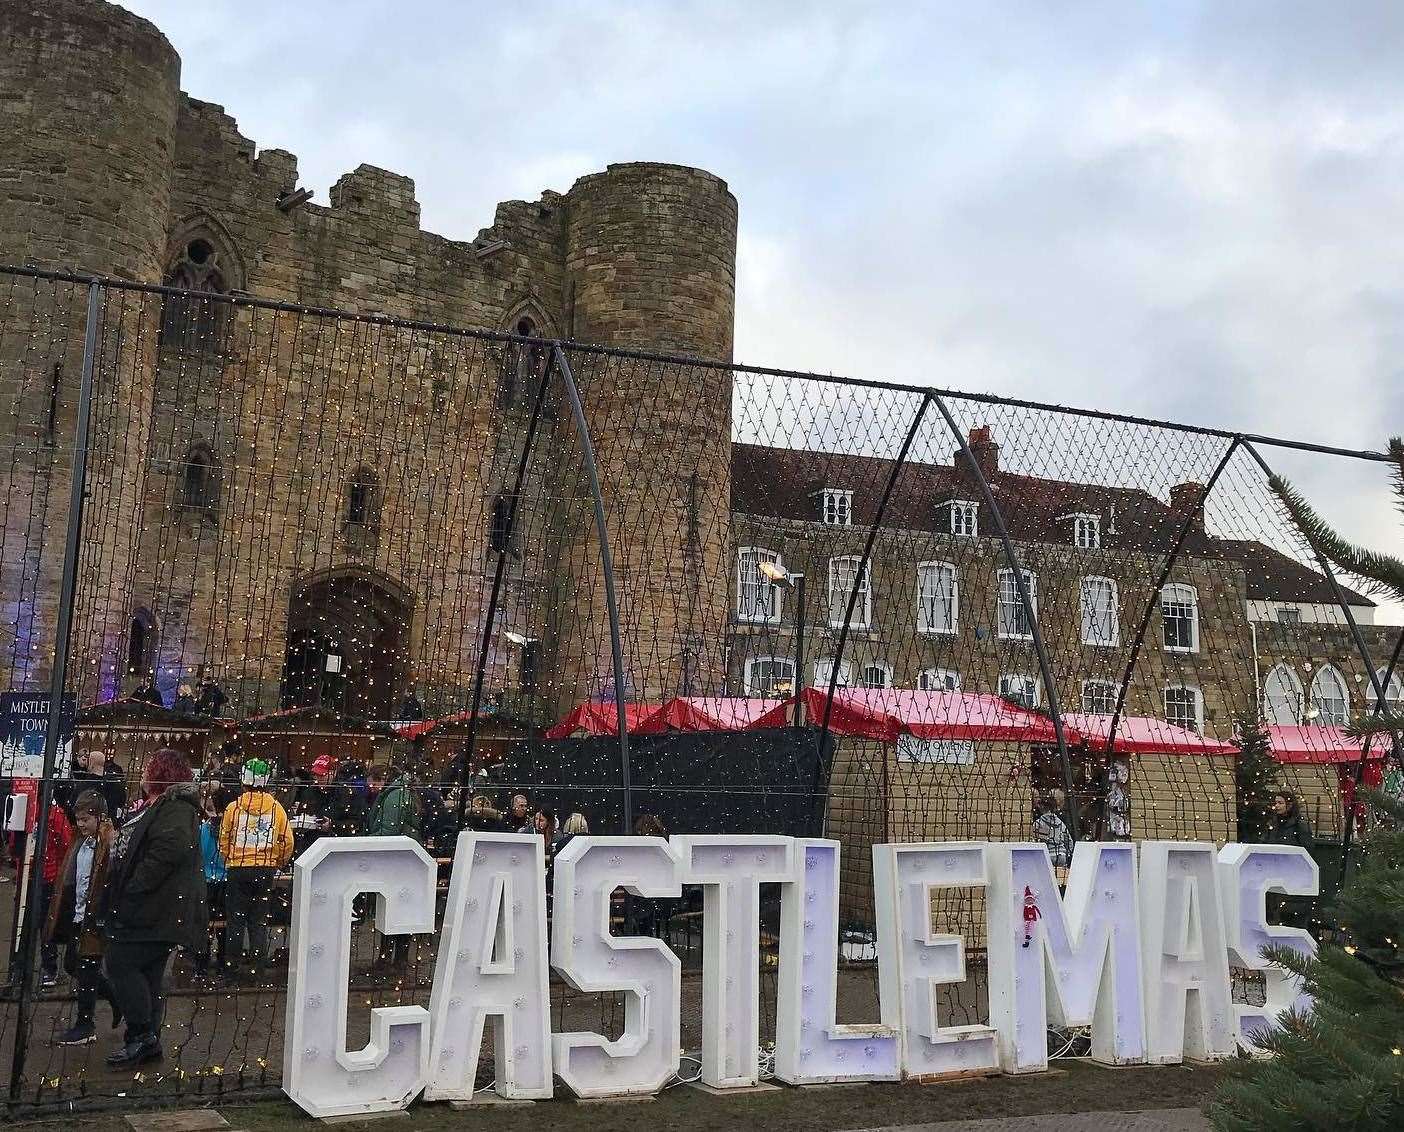 Castlemas took place at Tonbridge Castle in 2021 and again in 2022. Picture: Castlemas